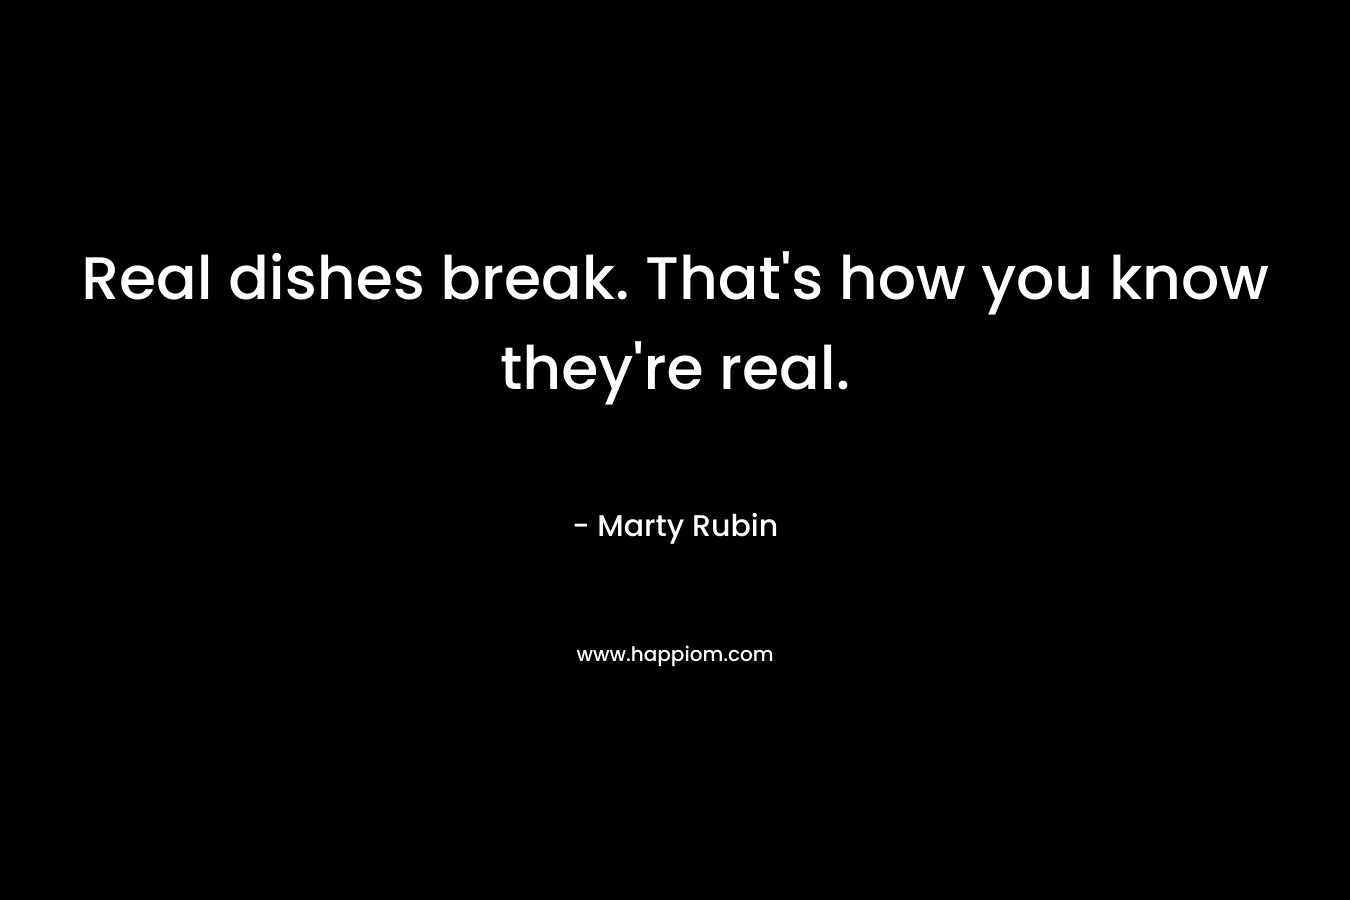 Real dishes break. That's how you know they're real.